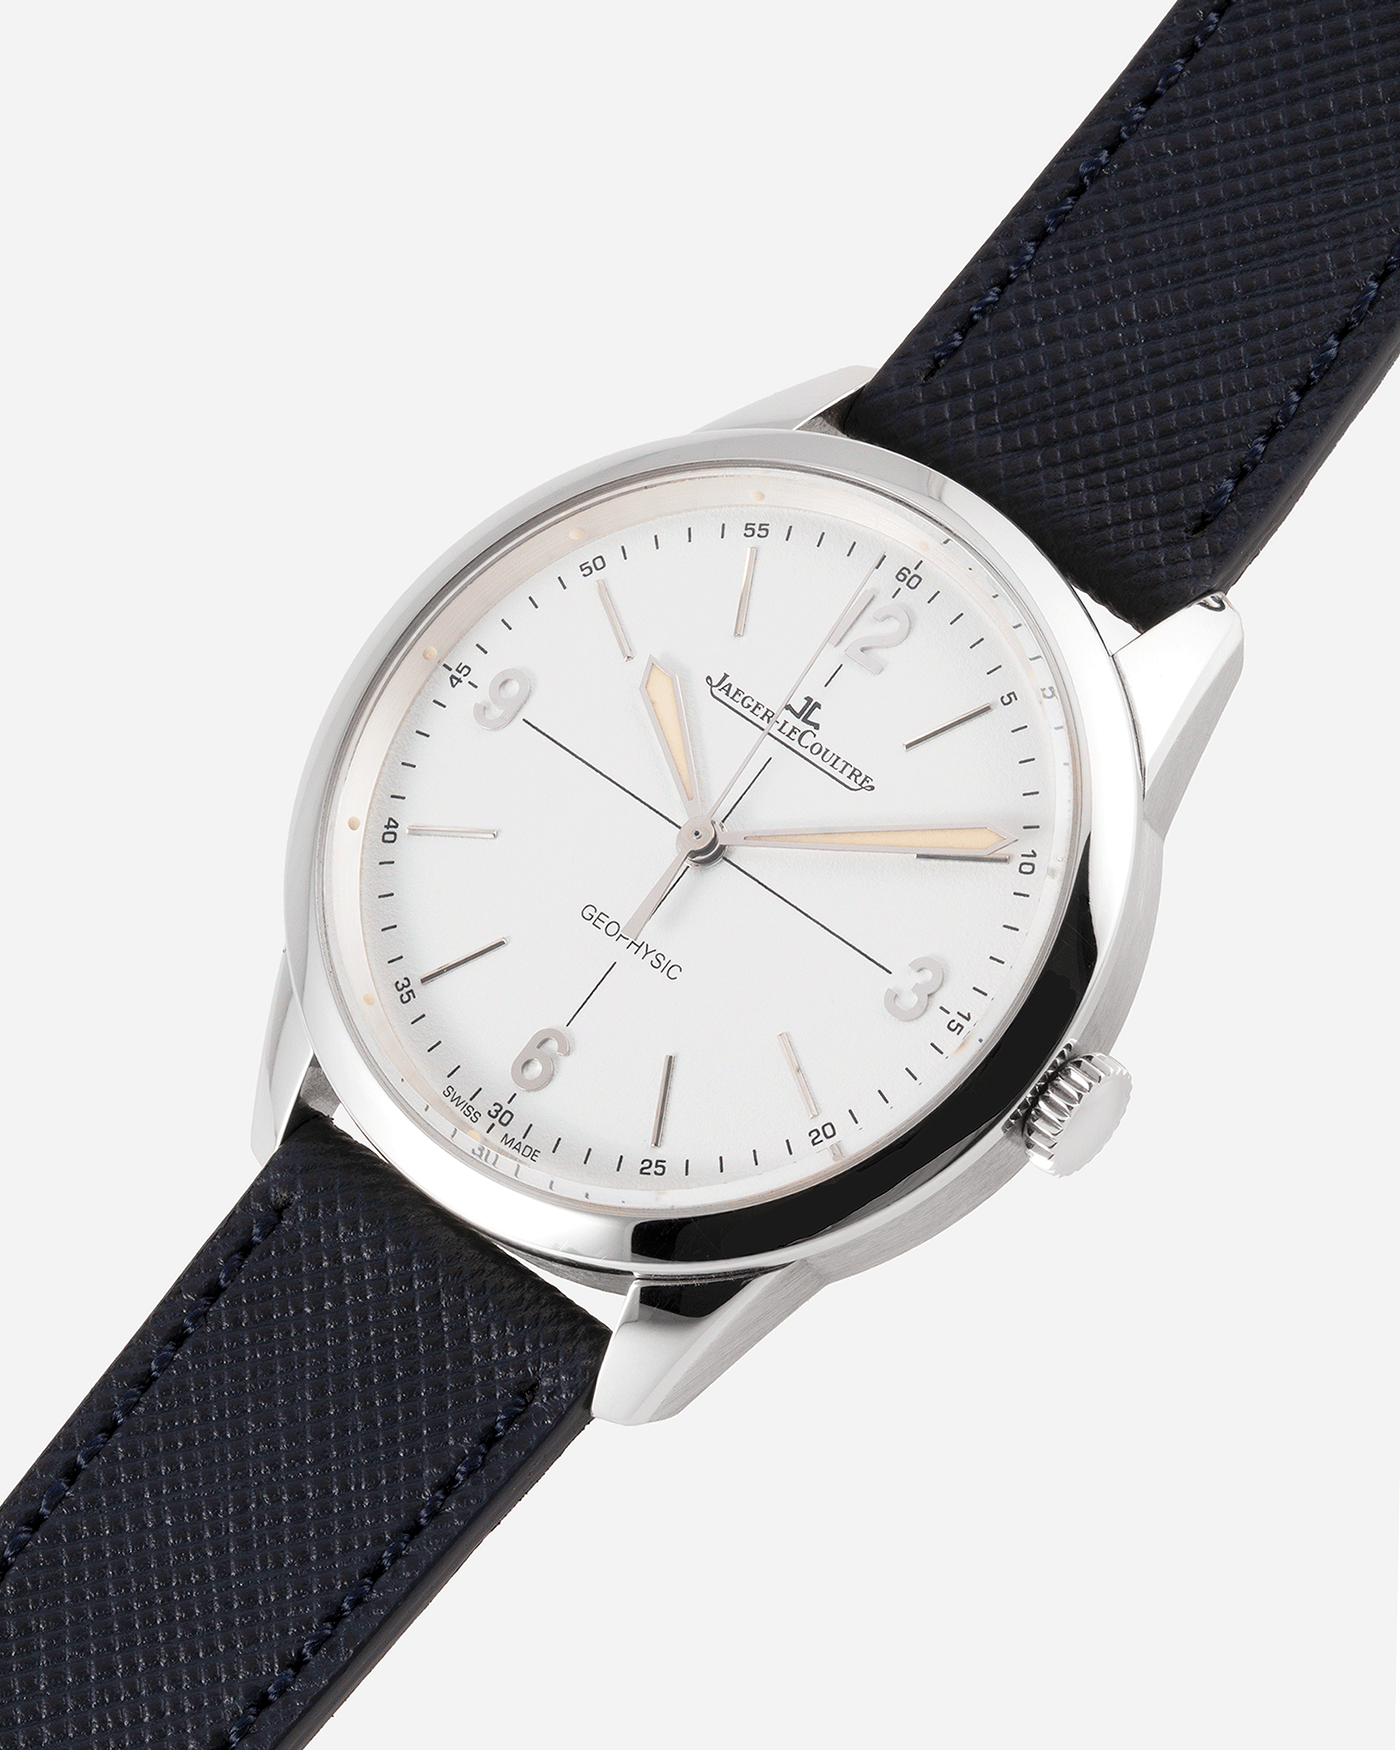 Brand: Jaeger-LeCoultre Year: 2014 Model: Geophysic 1958 Reference Number: Q8008520 Material: Stainless Steel Movement: In-house self winding Cal. 898/1 Case Diameter: 38.5mm Bracelet/Strap: Black Jaeger-LeCoultre Alligator Strap and Stainless Steel Tang Buckle and Molequin X S.Song Navy Calf Strap